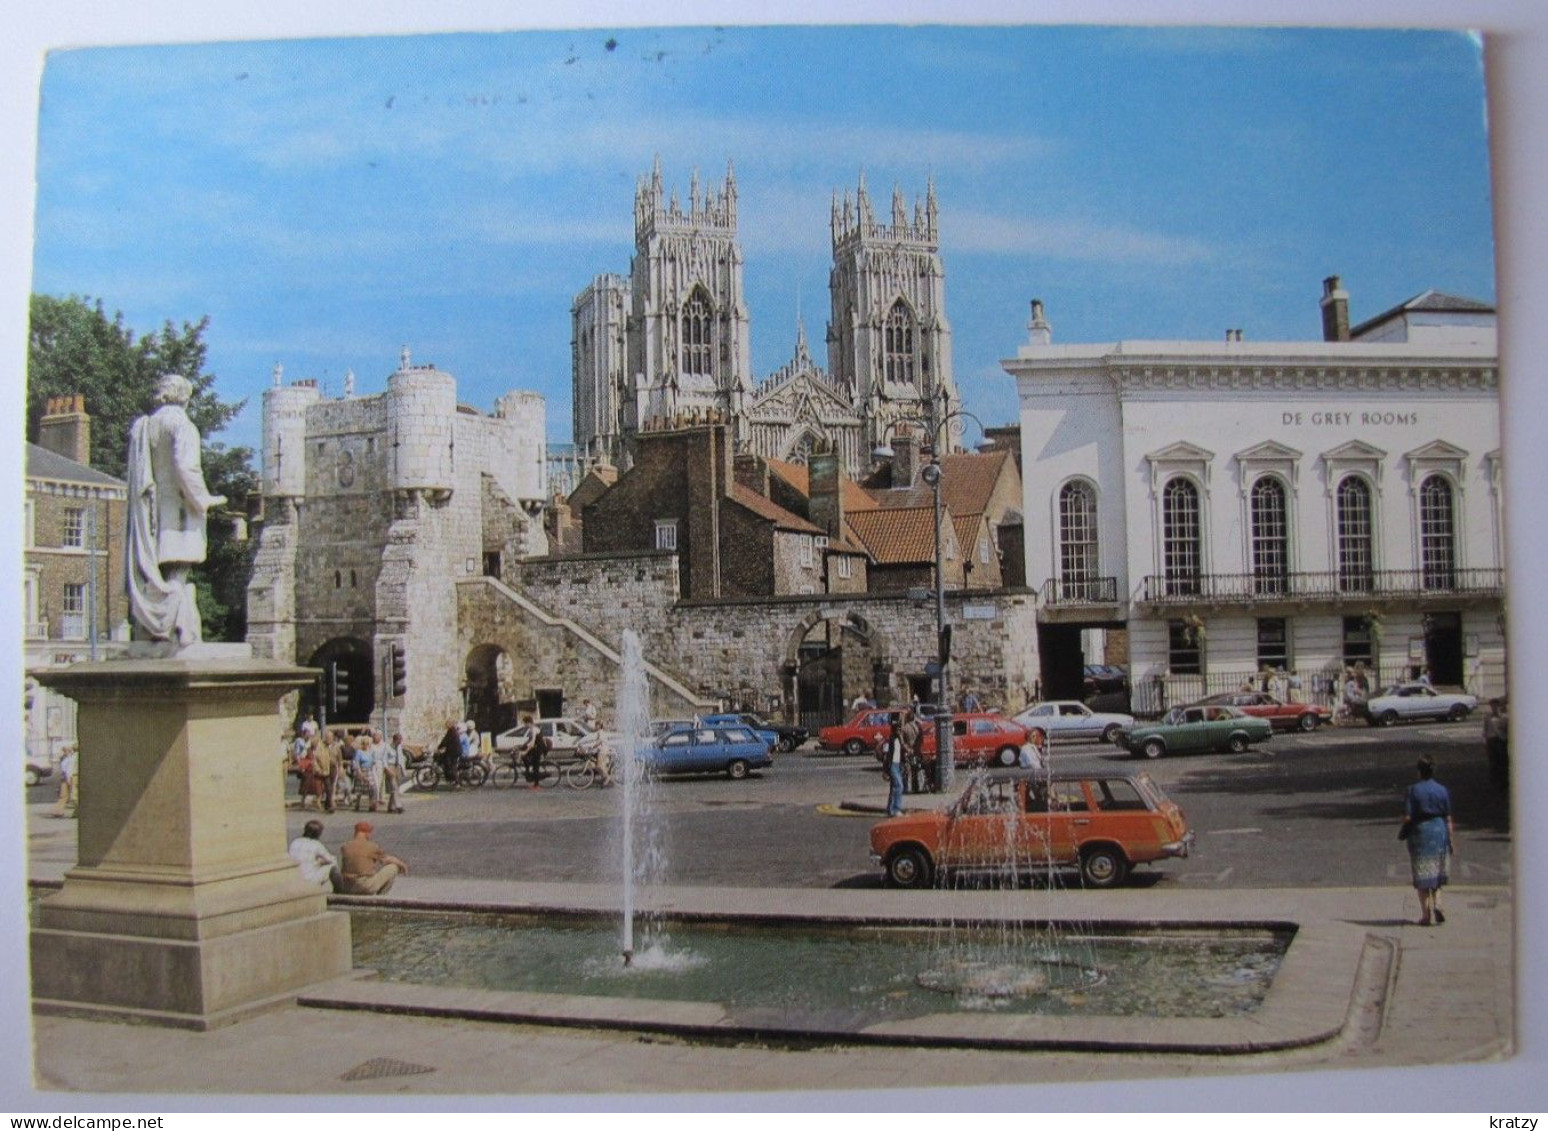 ROYAUME-UNI - ANGLETERRE - YORKSHIRE - YORK - Bootham Bar And Minster From Exhibition Square - York